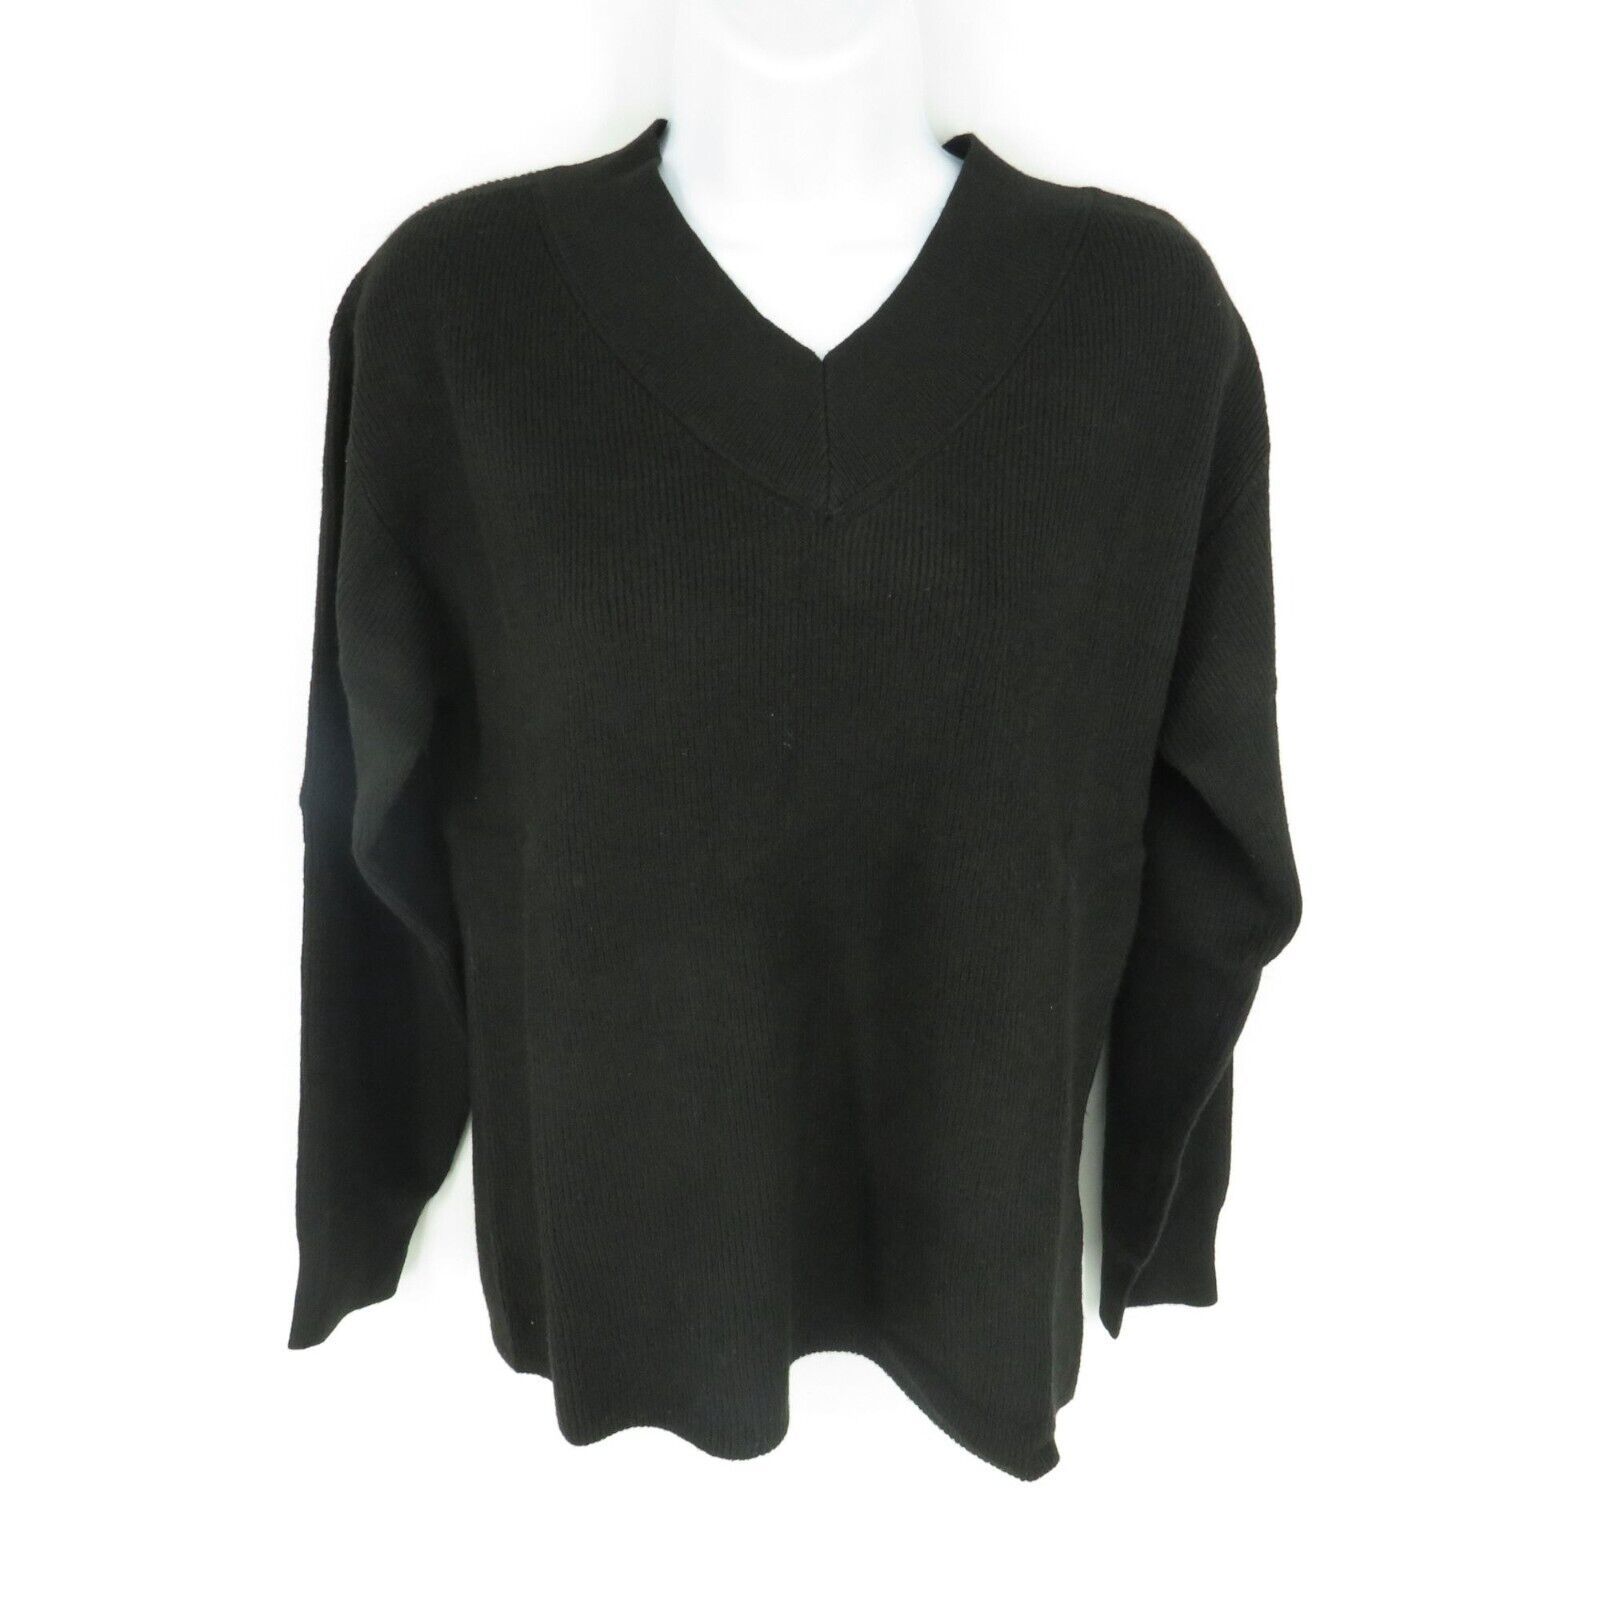 Primary image for Nine West Women's V-Neck Ribbed Black Sweater XXL NWT $49